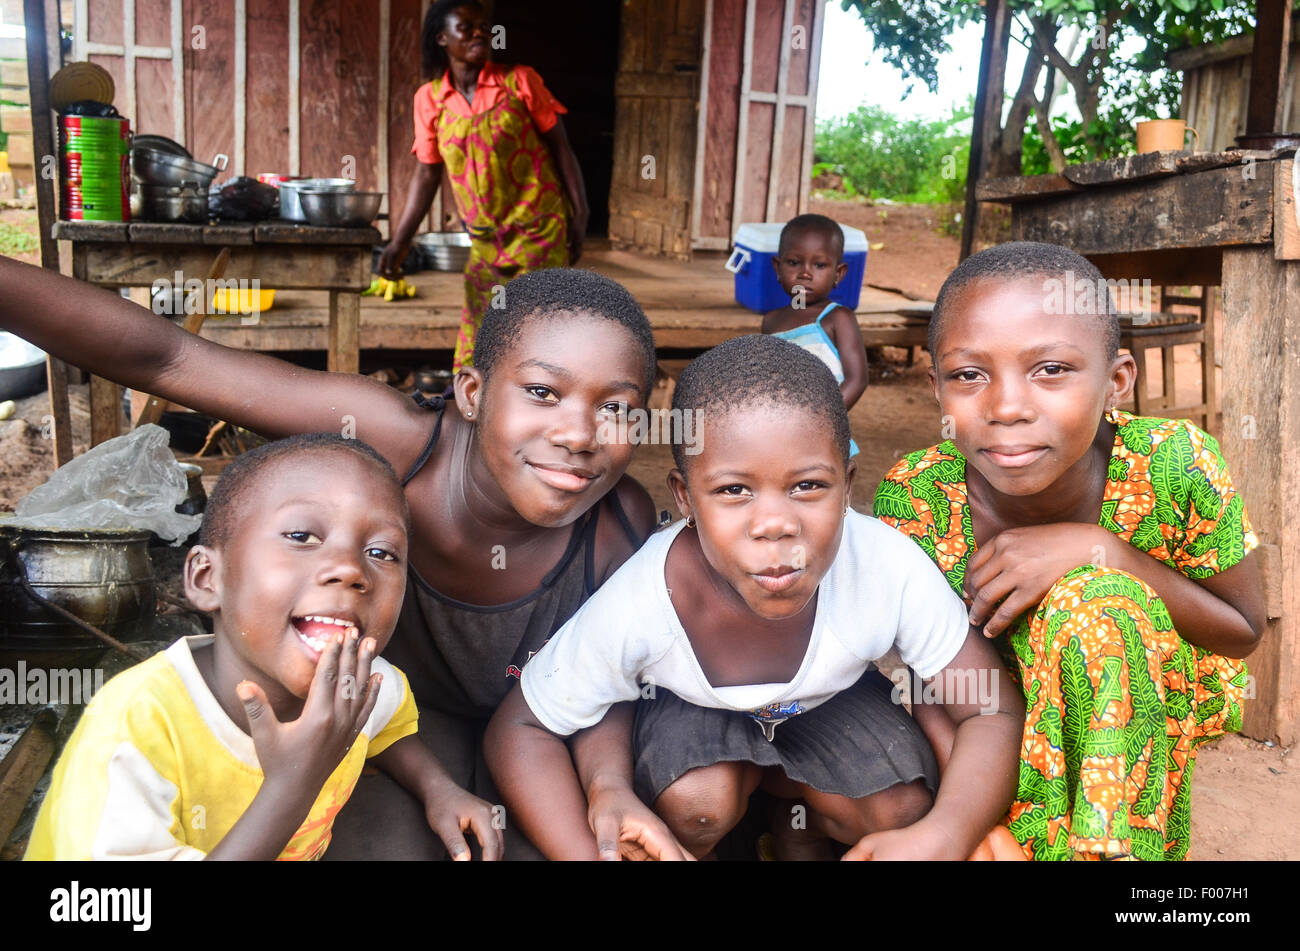 Smiling Ghanaian children in a road side kitchen in Ghana Stock Photo